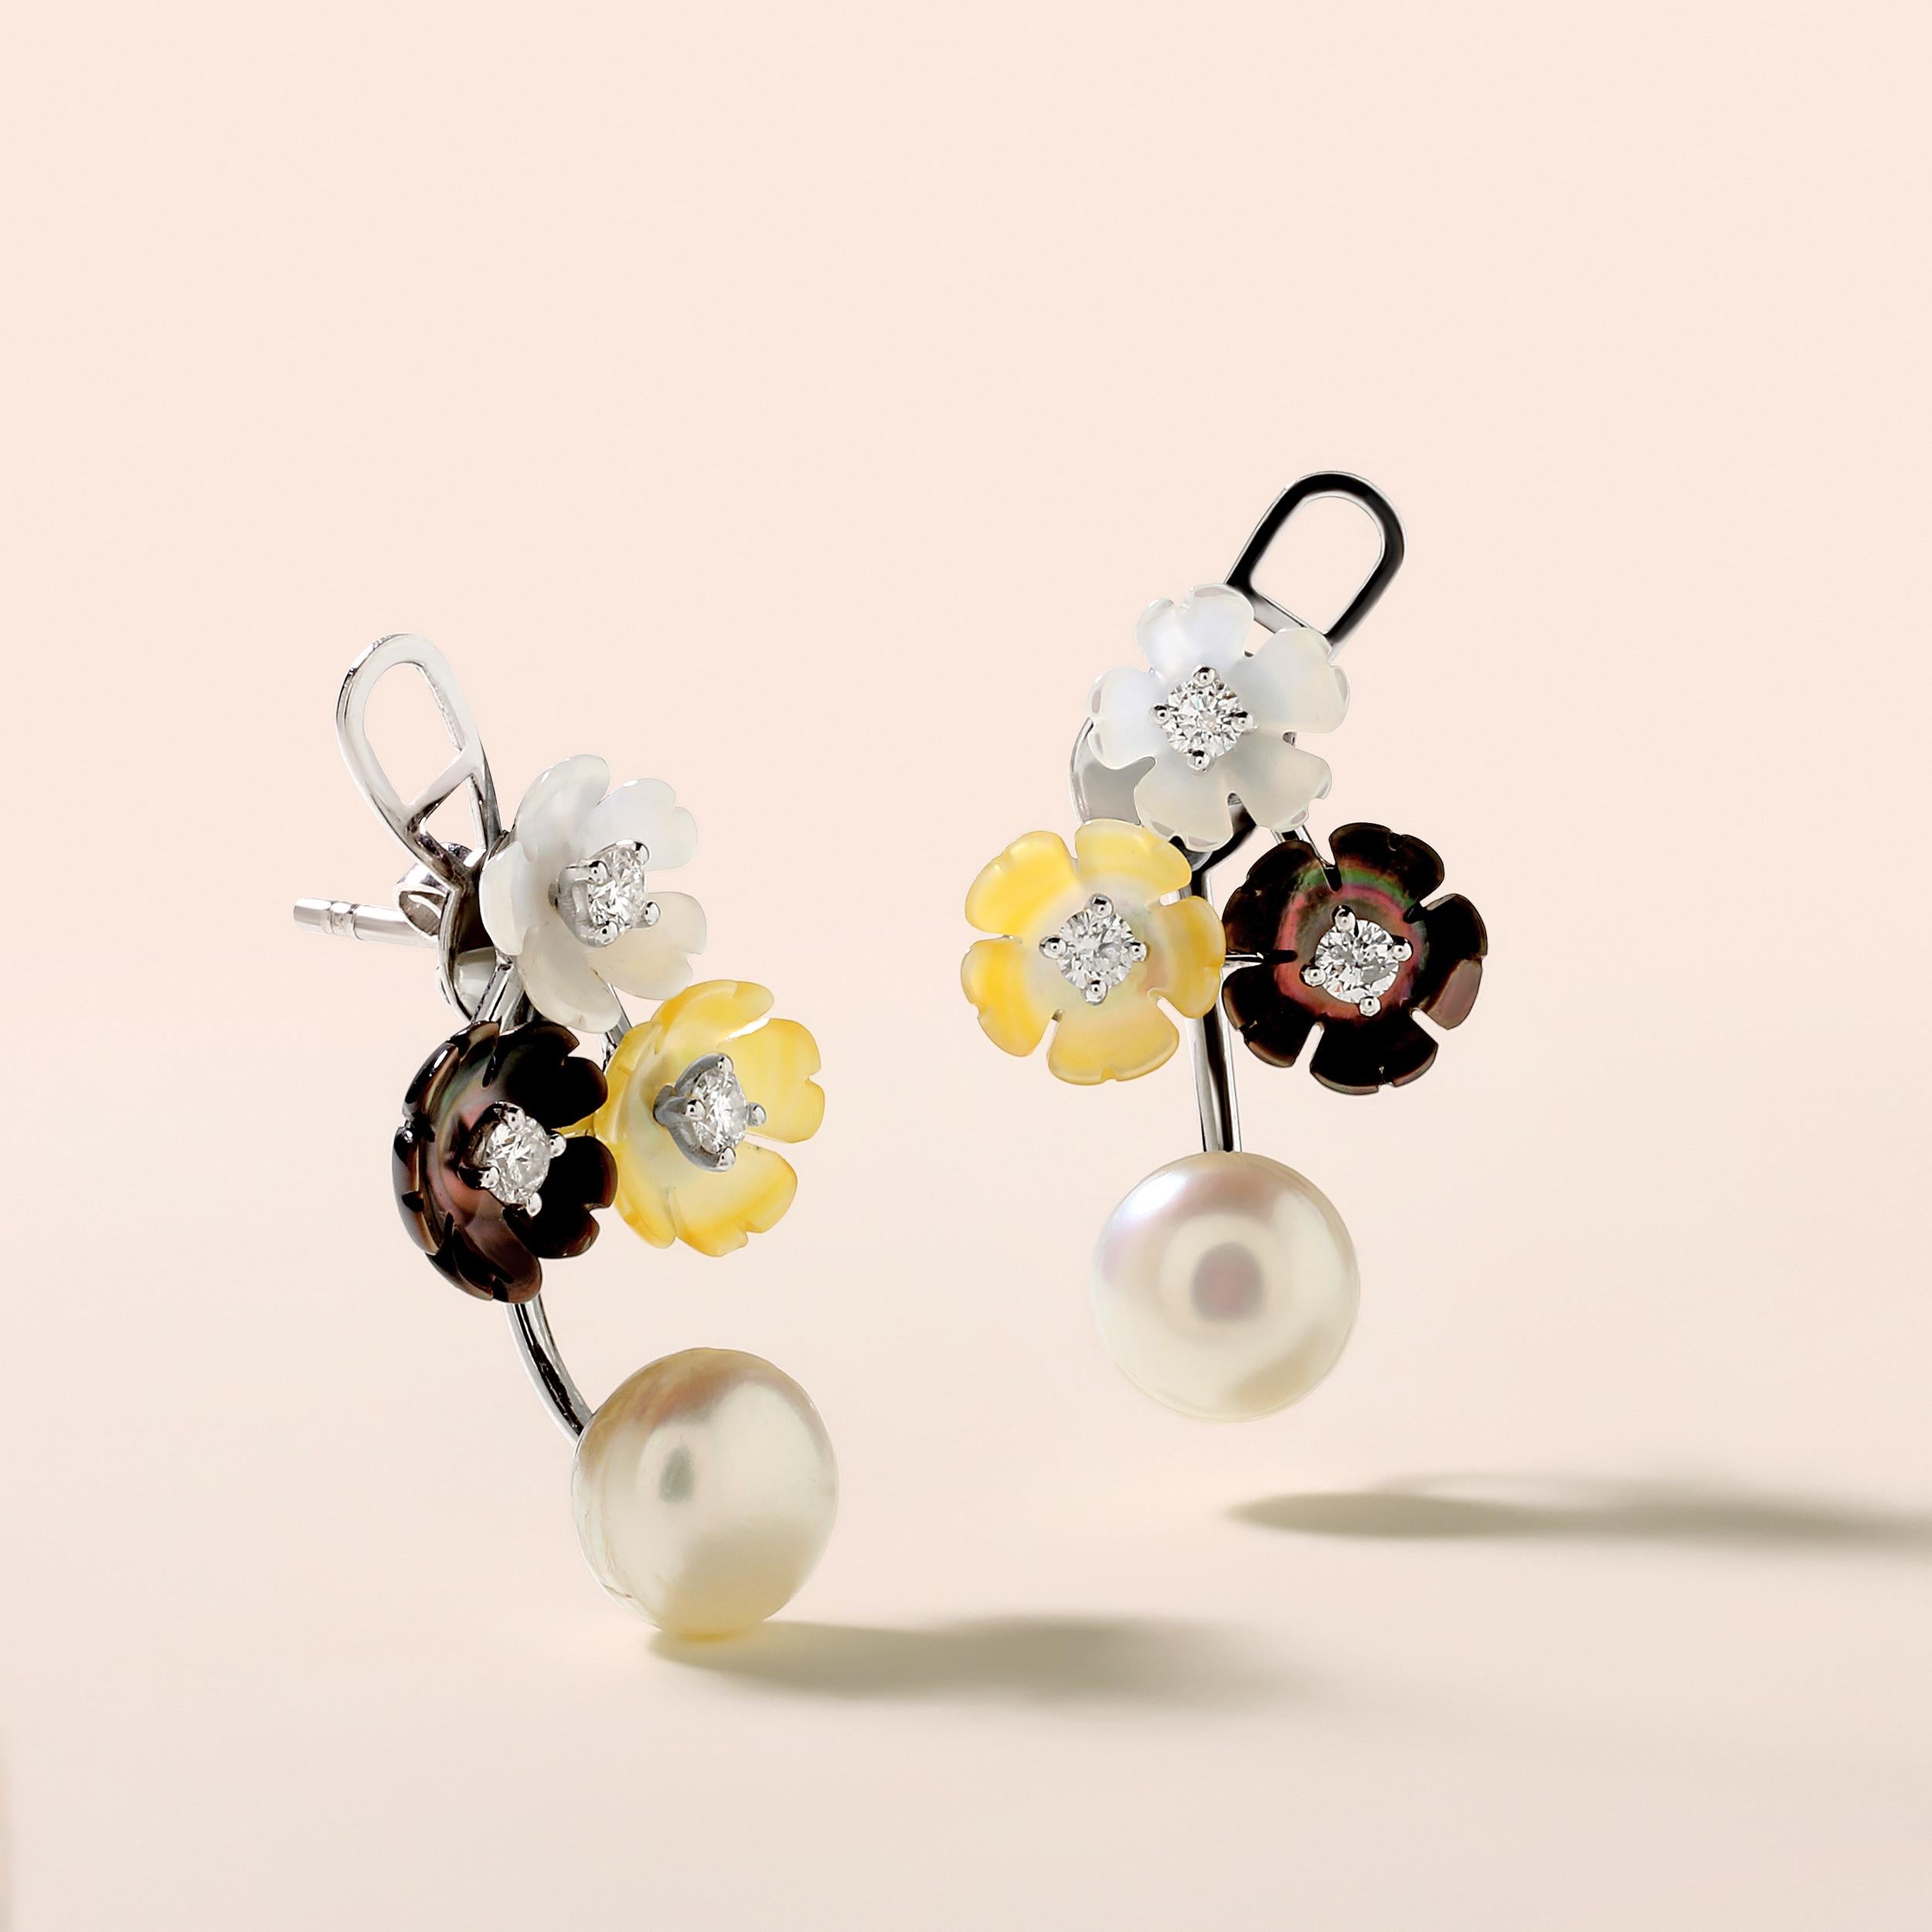 Crafted in 5.54 grams of 14K White Gold, the earrings contains 6 stones of Round Diamonds with a total of 0.37 carat in F-G color and I1-I2 clarity combined with 6 stones of Cultured Pearls with a total of 9.75 carat.

CONTEMPORARY AND TIMELESS